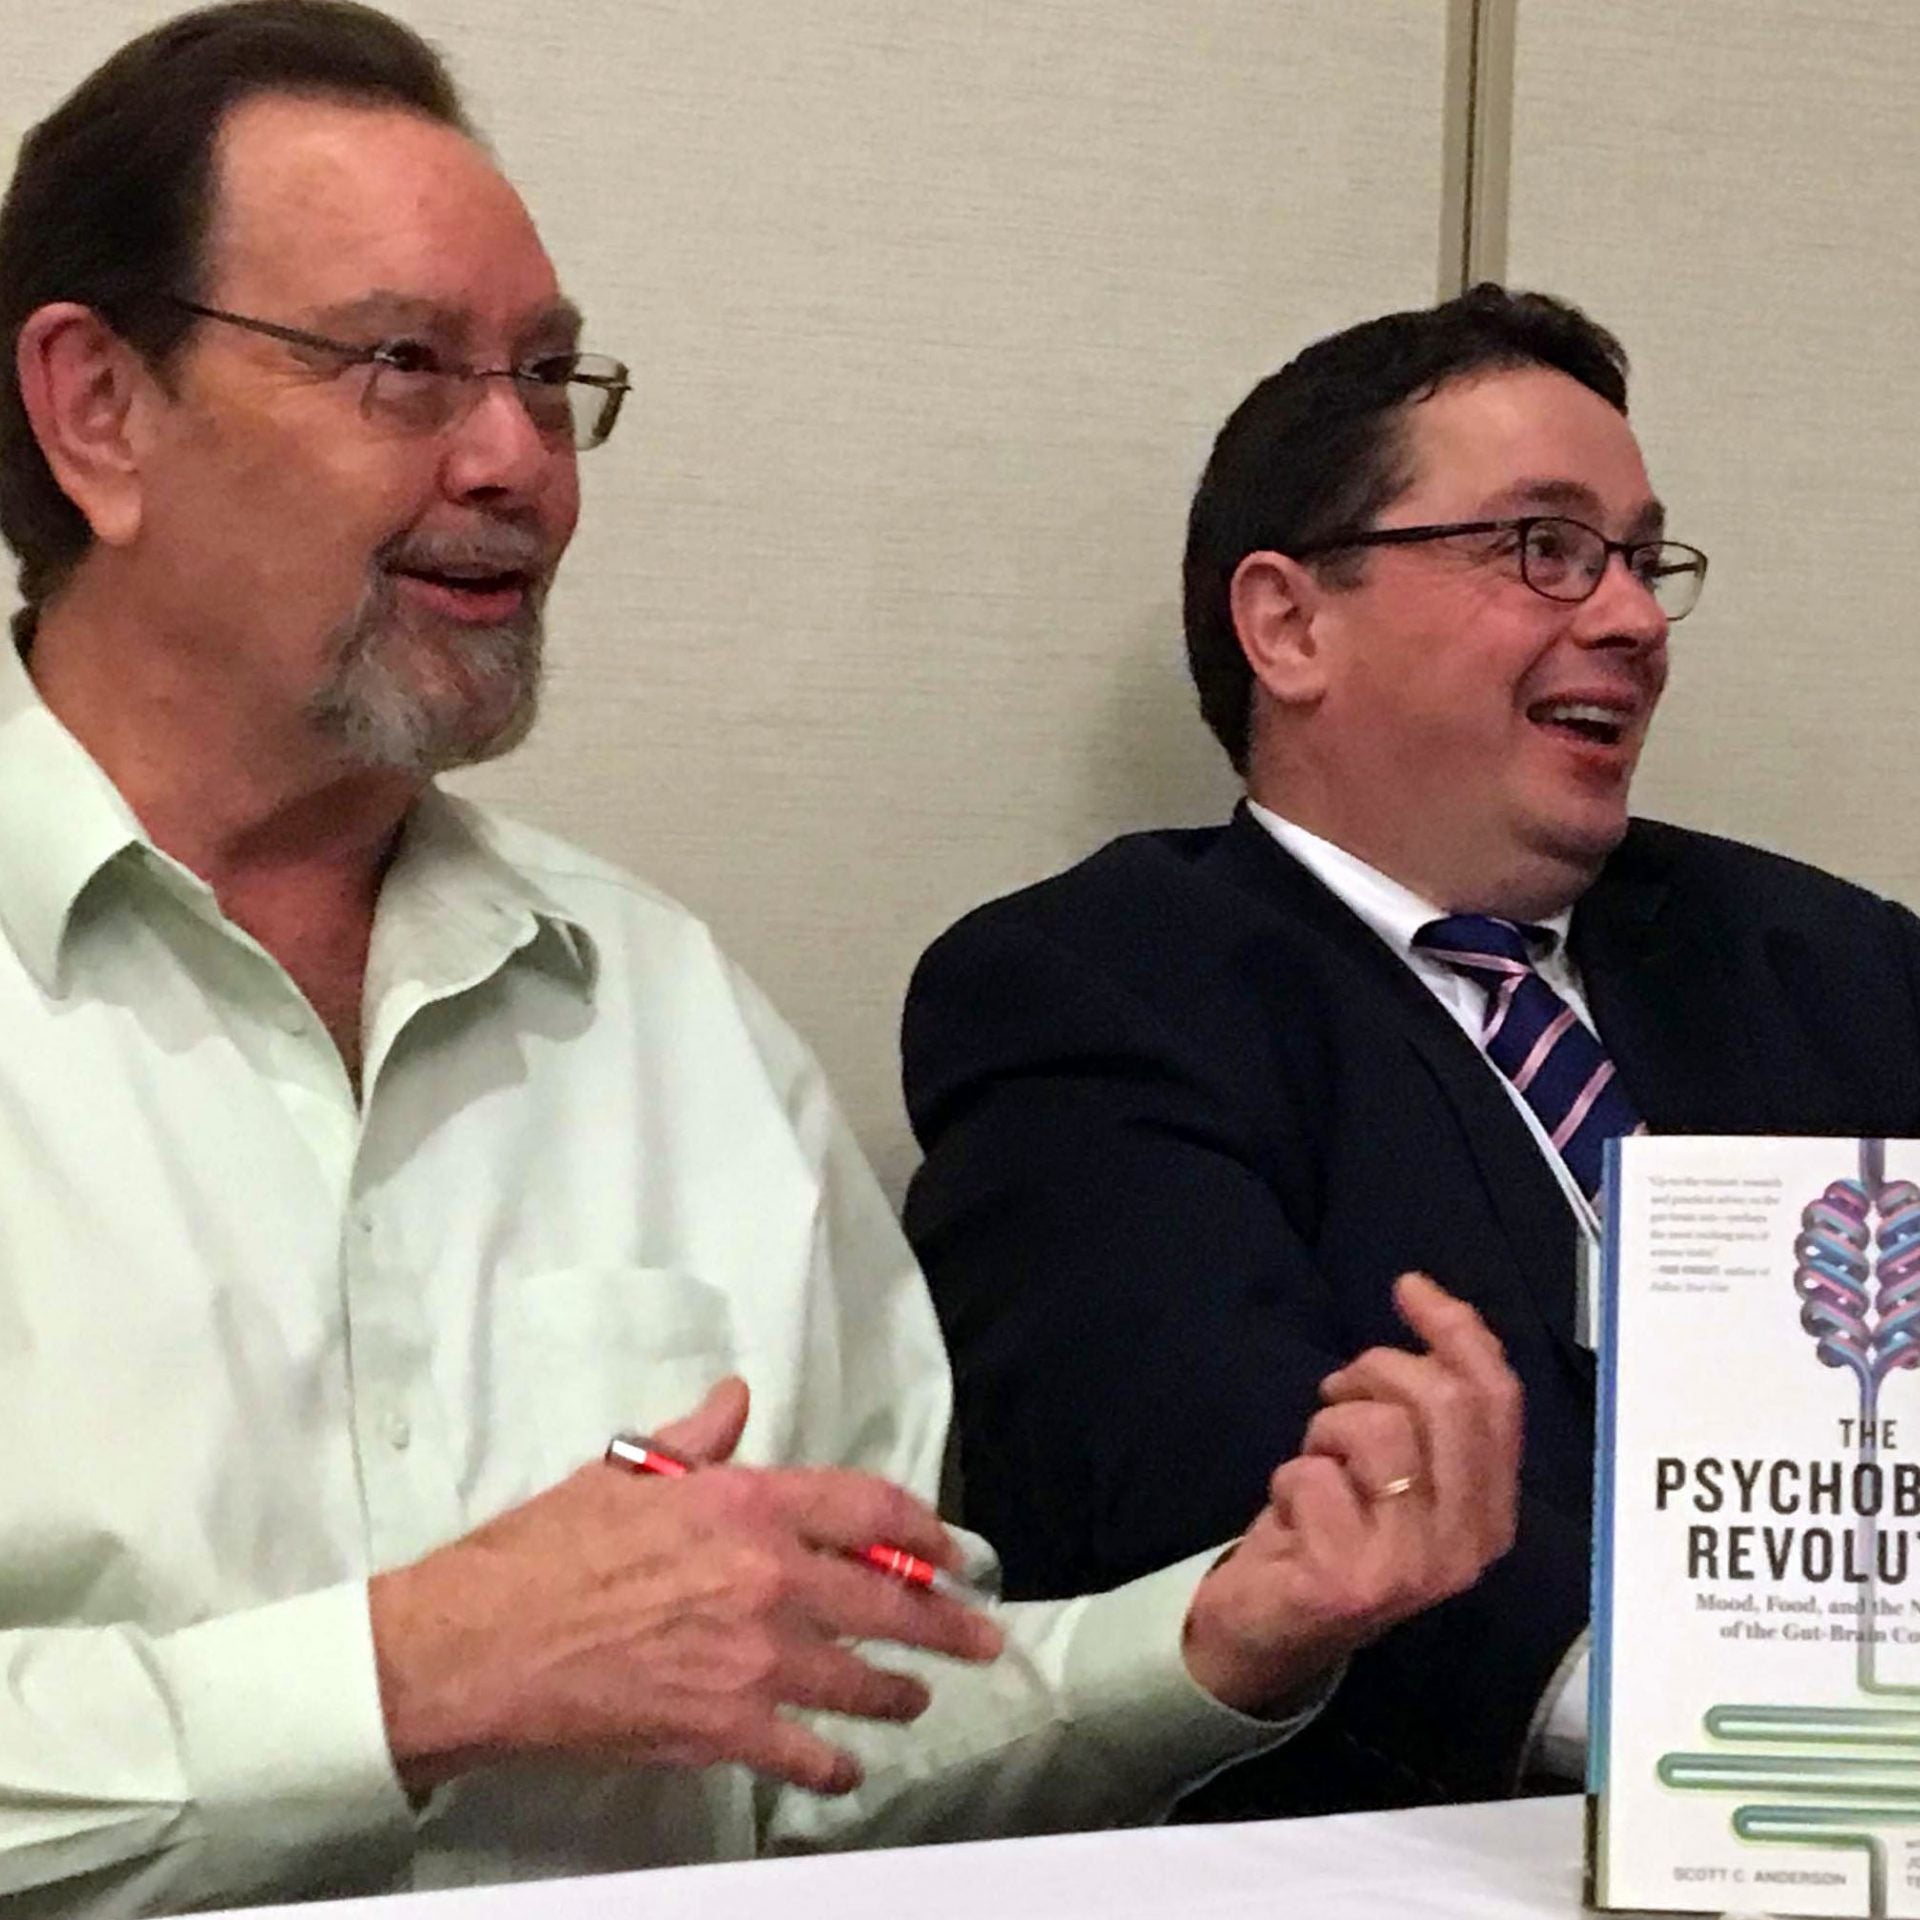 A Conversation With Scott C. Anderson, Co-Author Of ‘The Psychobiotic Revolution’